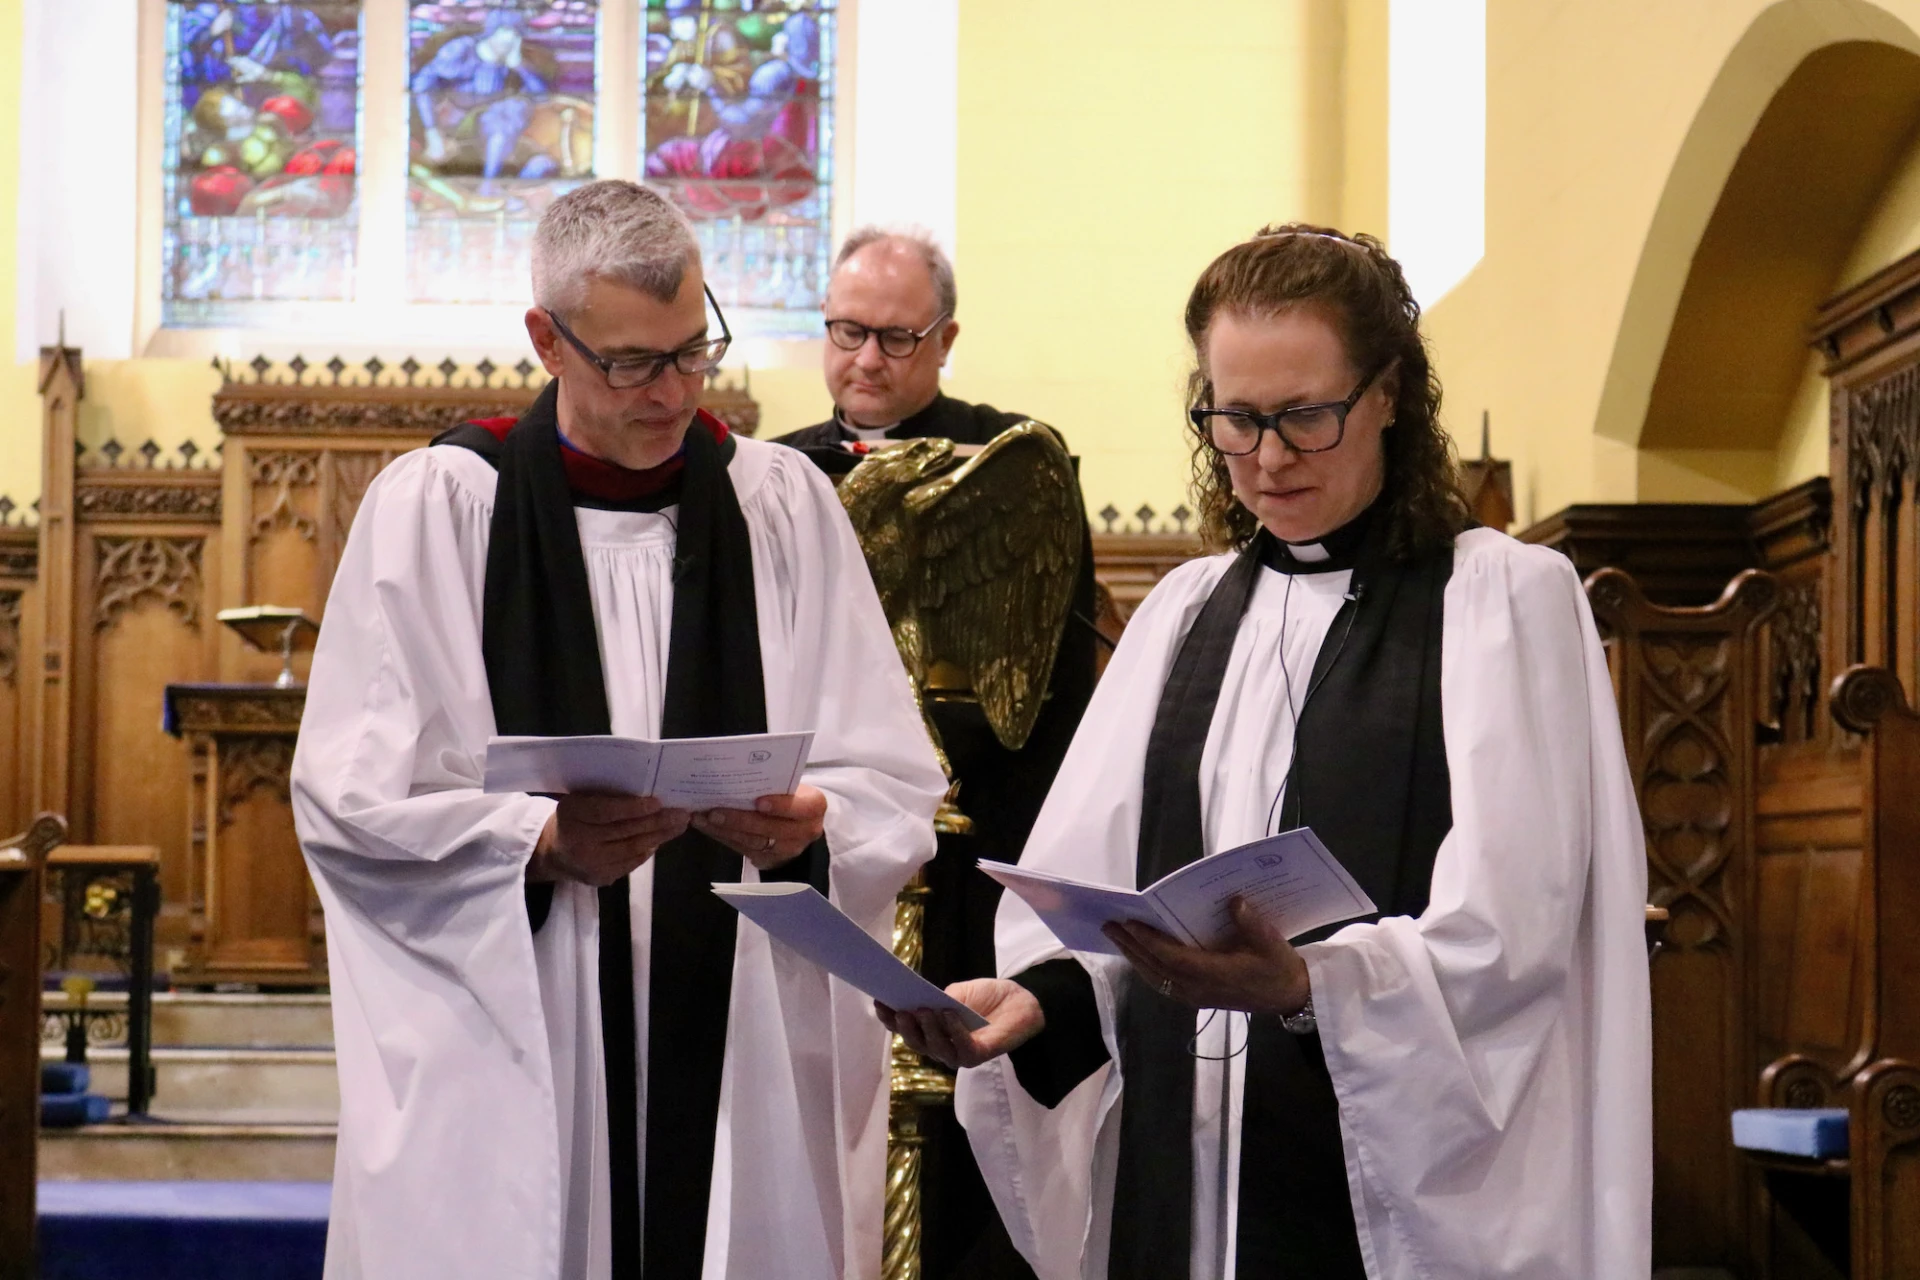 Jan is instituted as rector